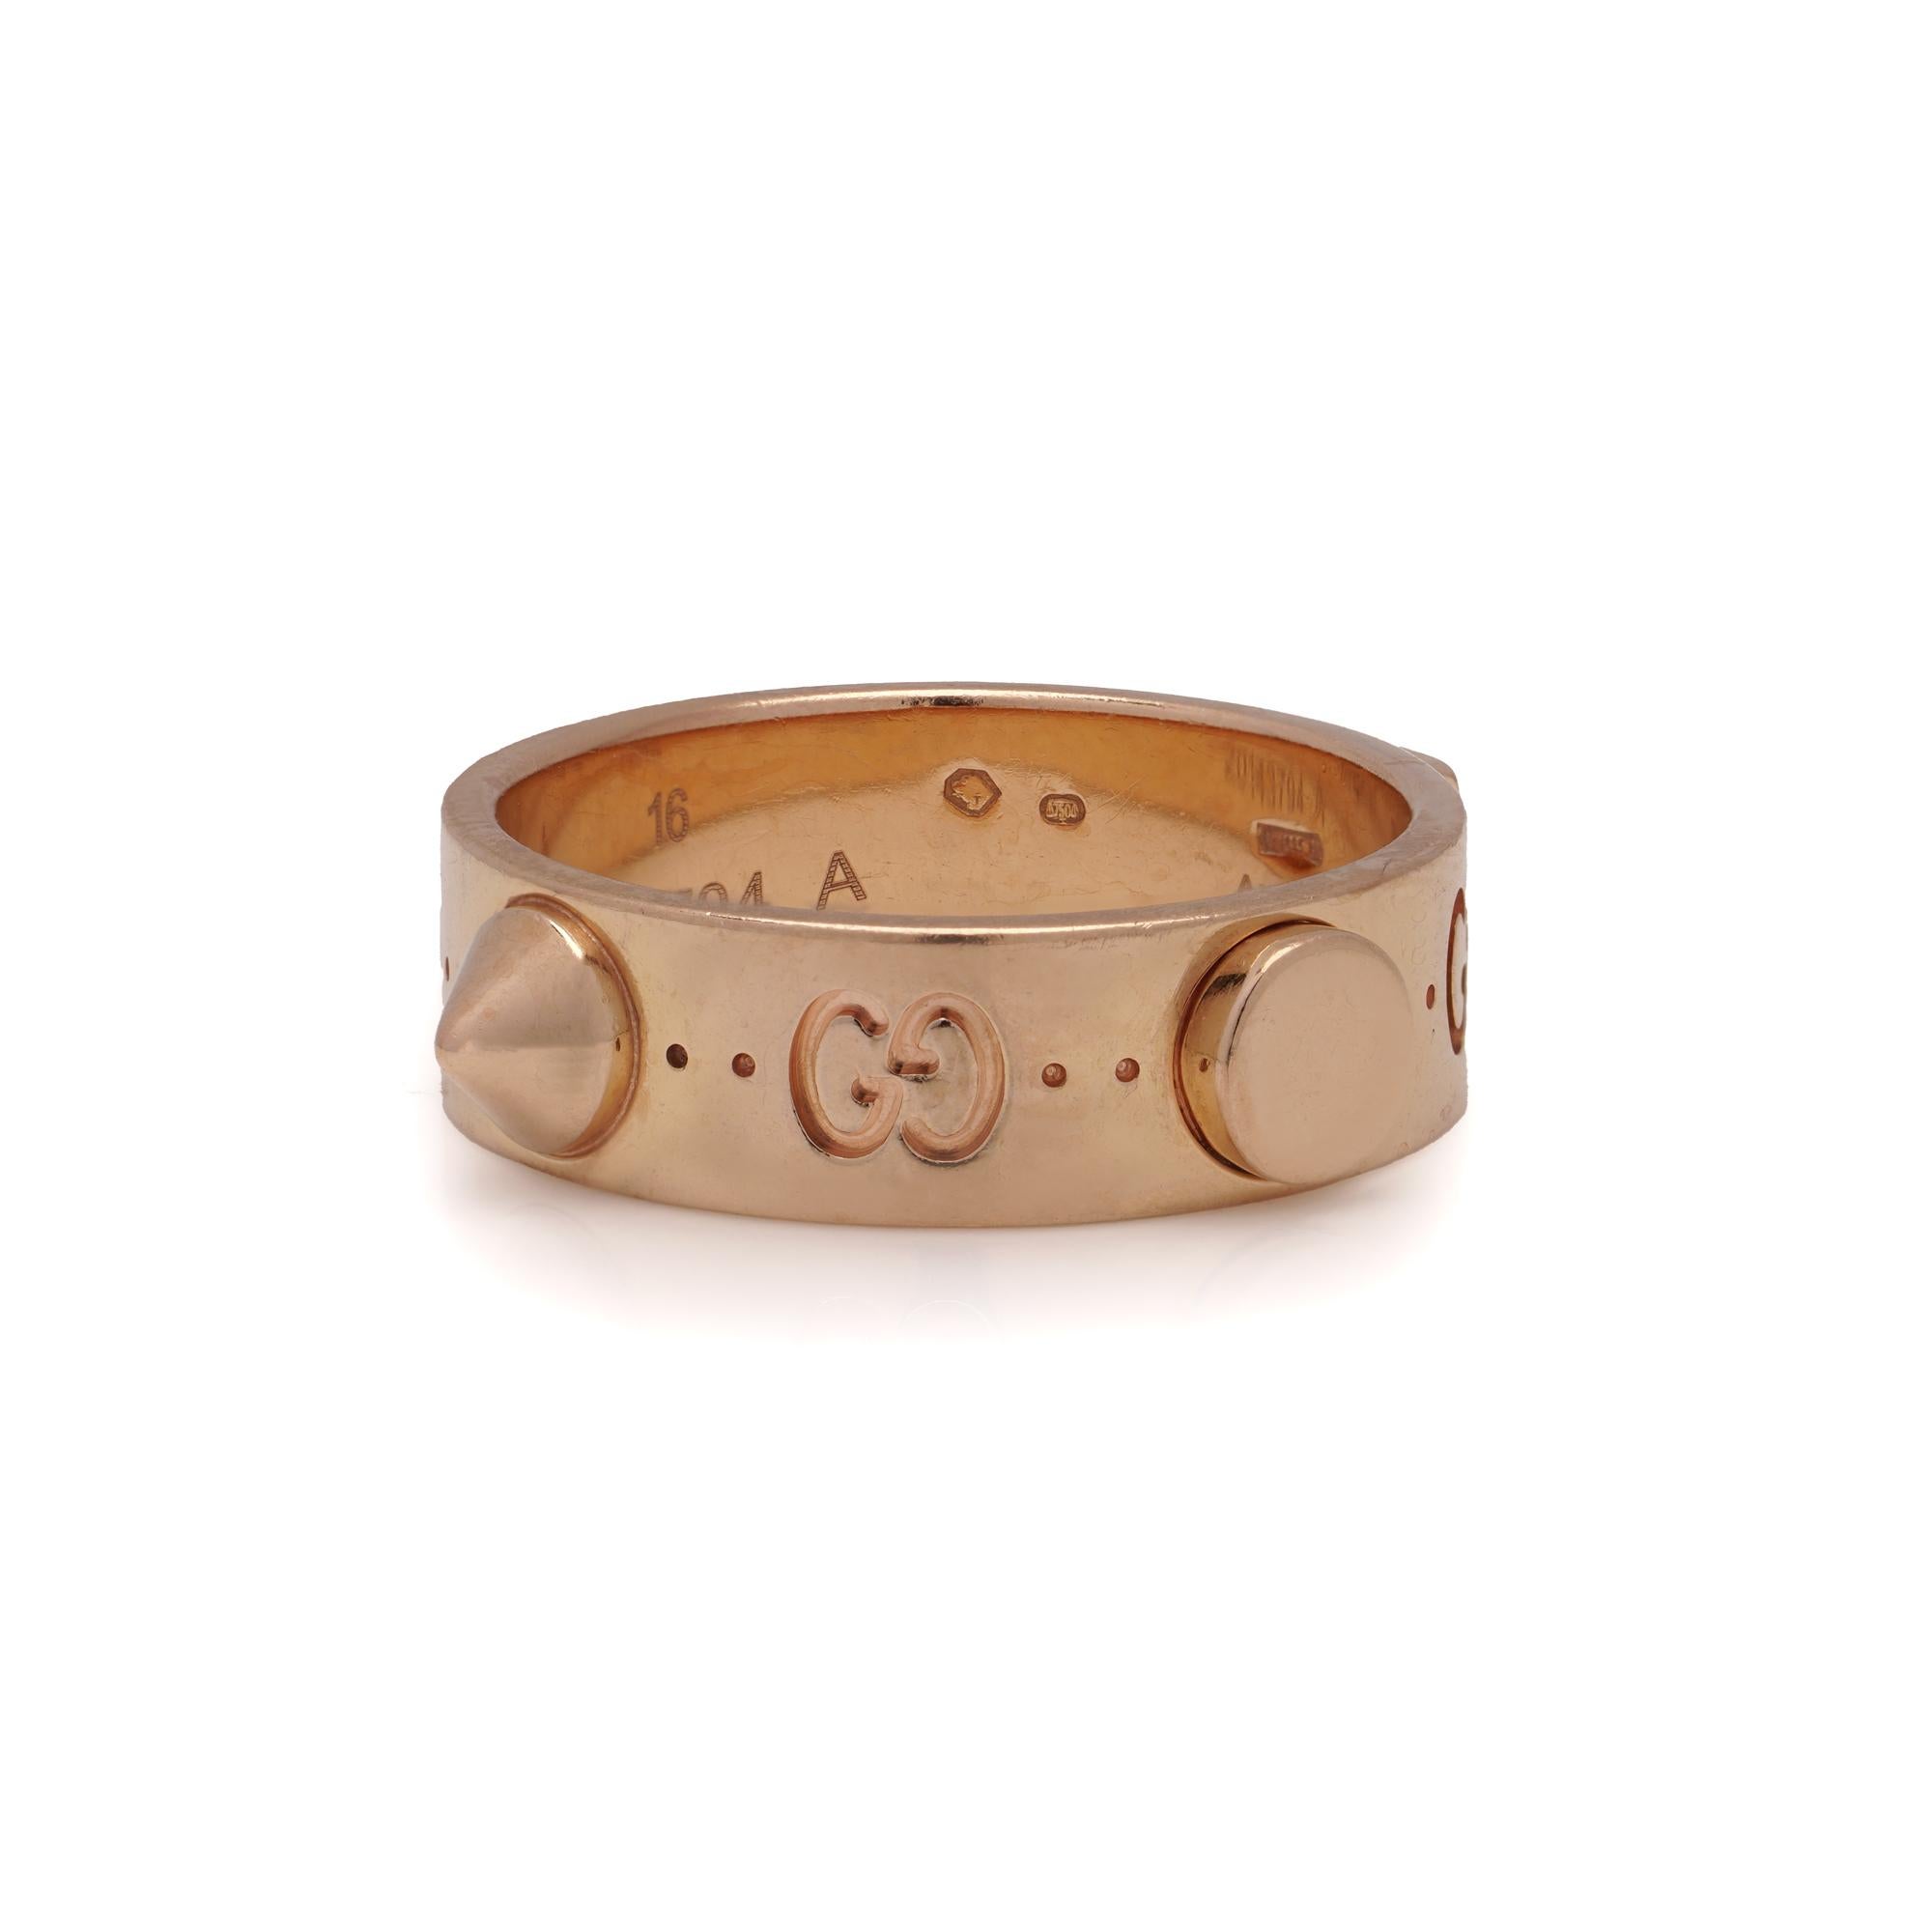 Women's Gucci 18kt rose gold Iconic band ring with studs